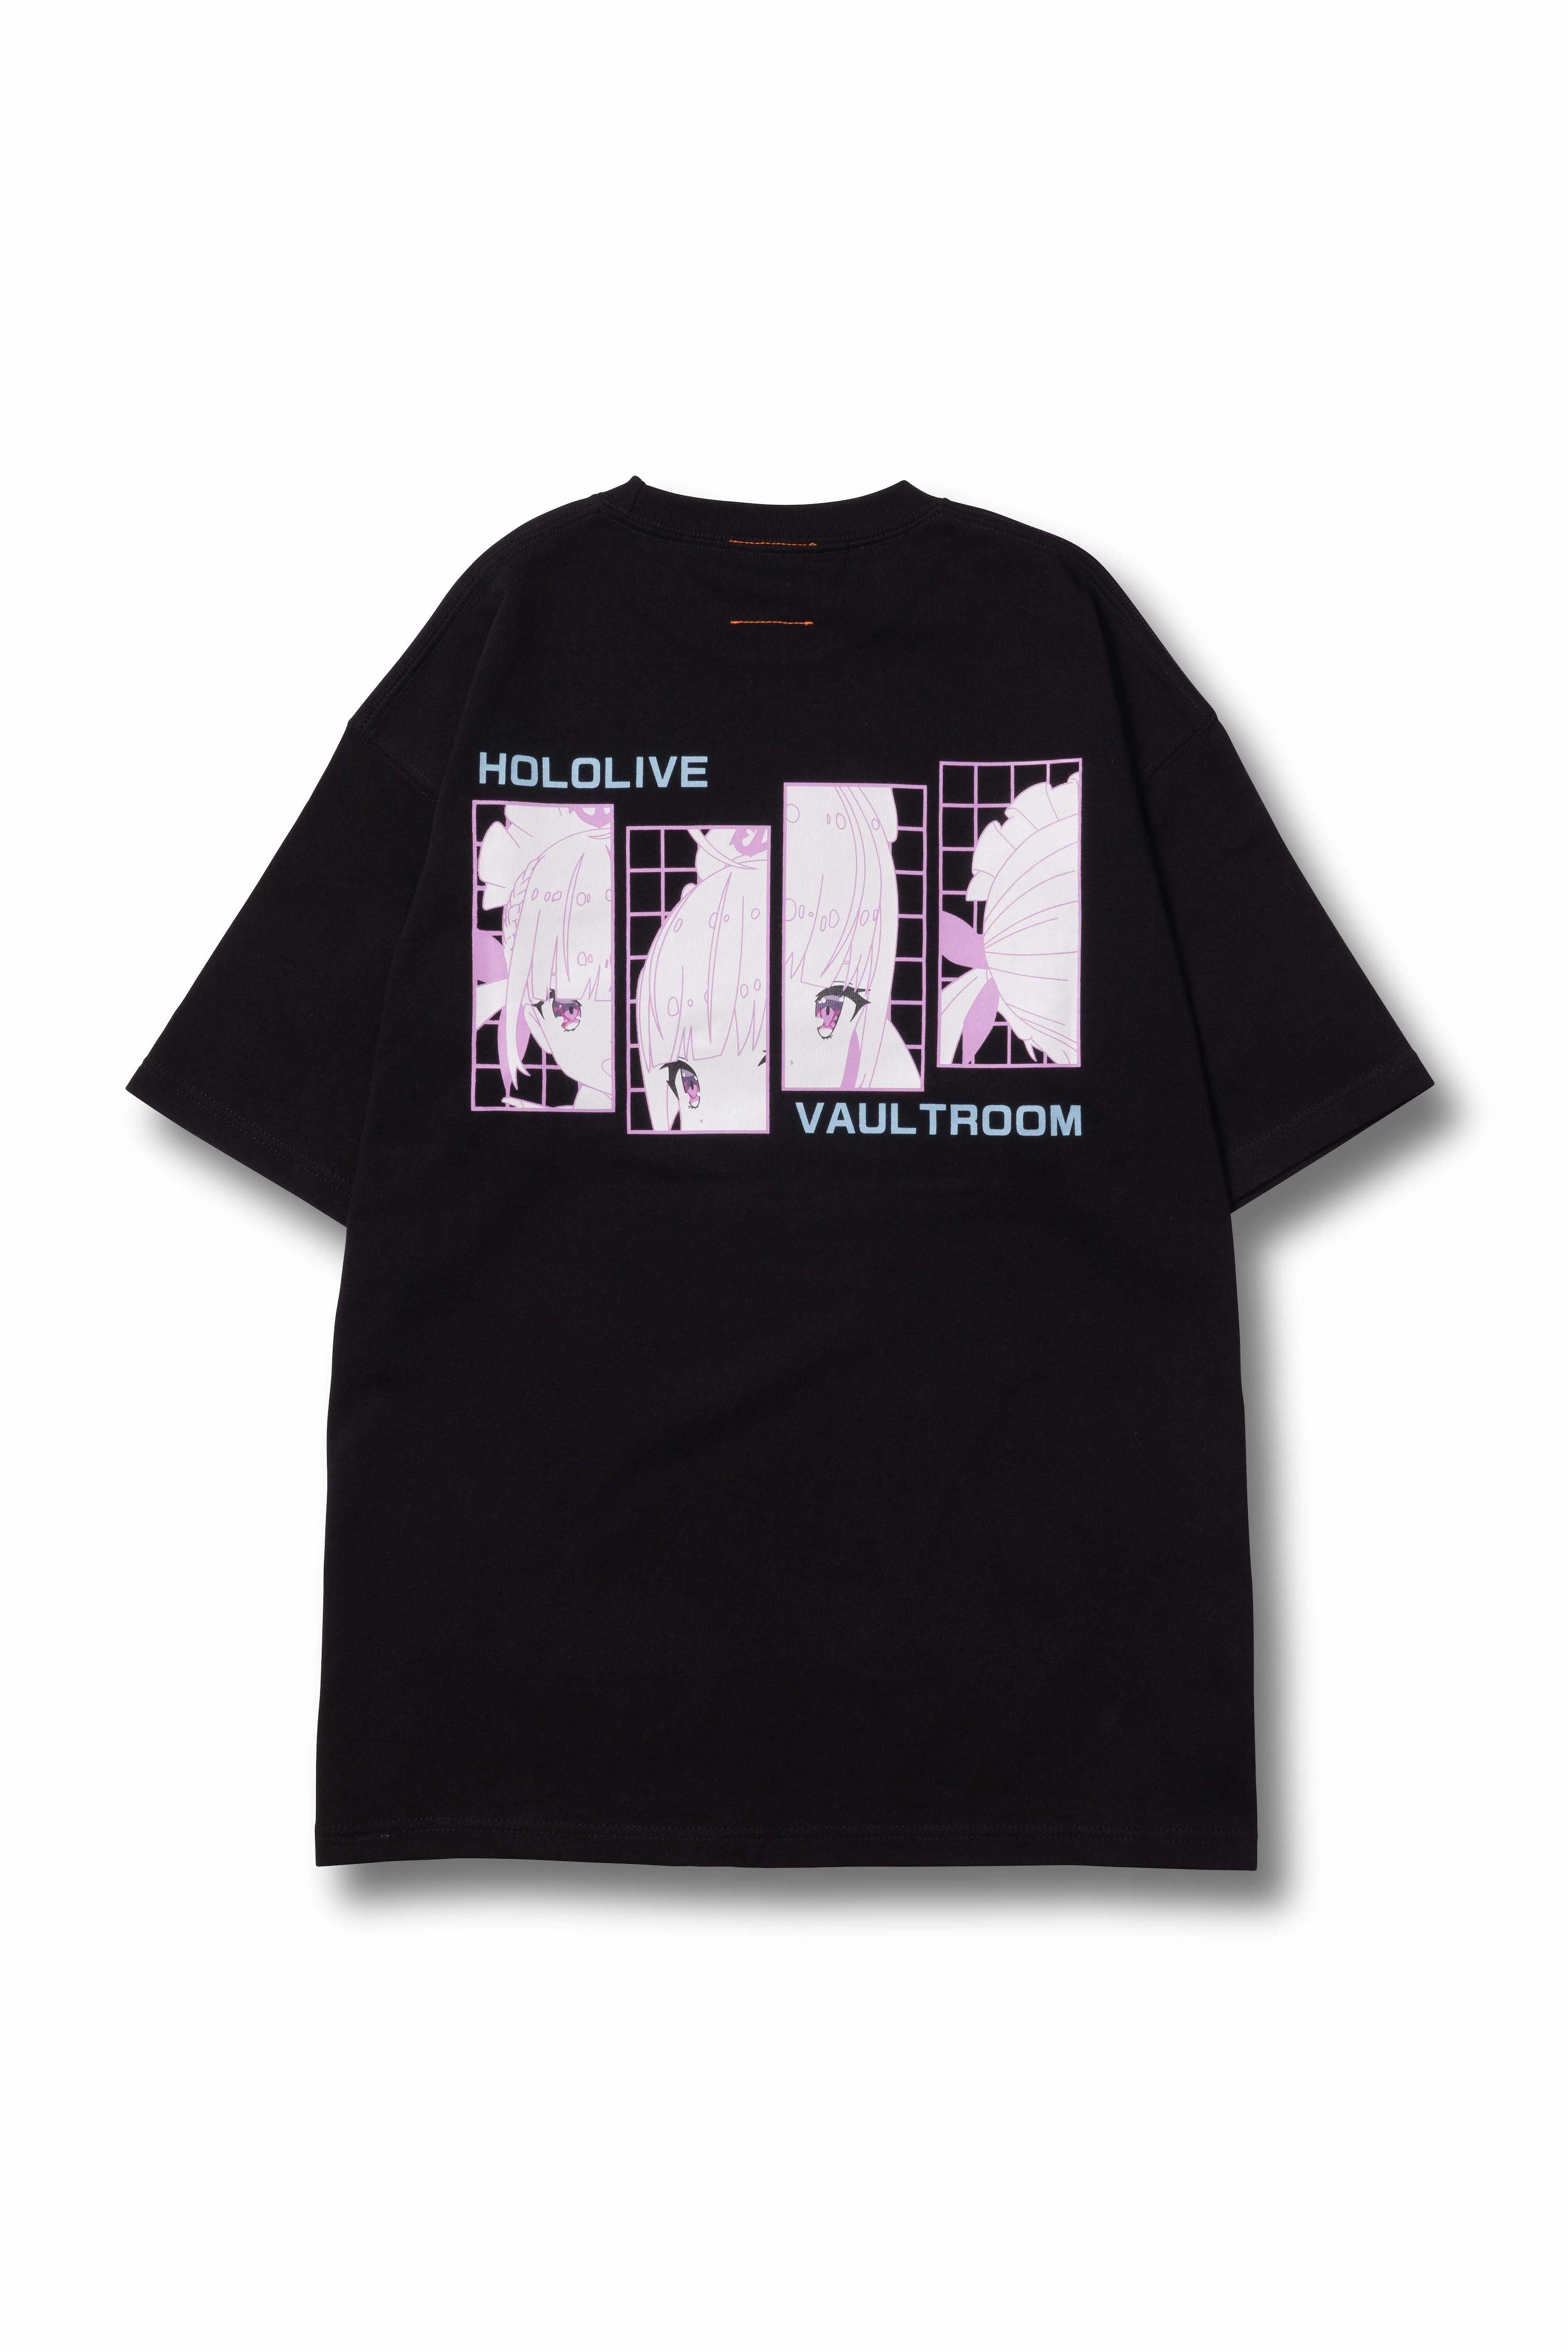 Vaultroom × Hololive STARTEND Tee WHT L - Tシャツ/カットソー(半袖